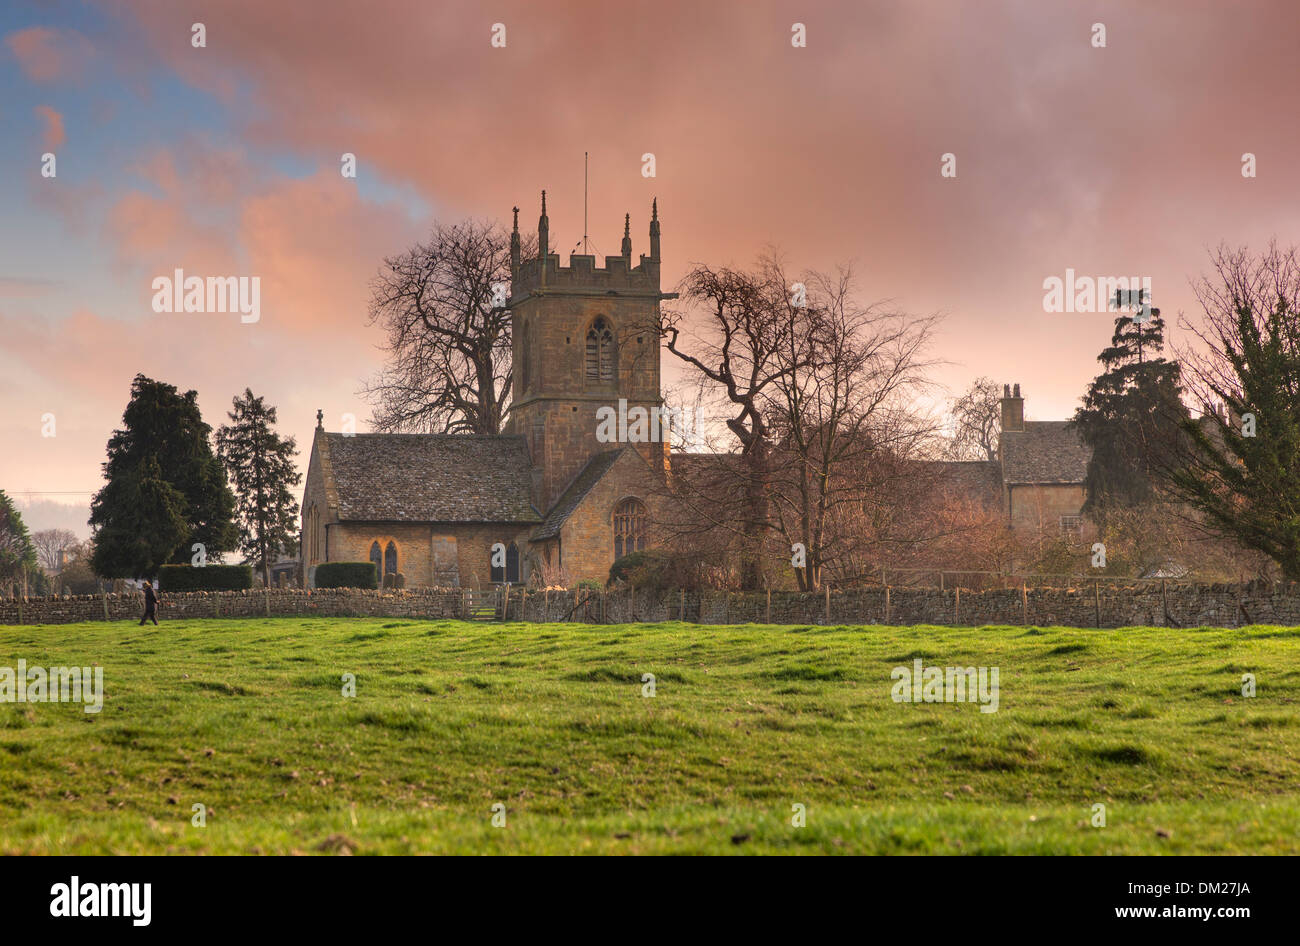 The old church at Willersey, Gloucestershire, England. Stock Photo